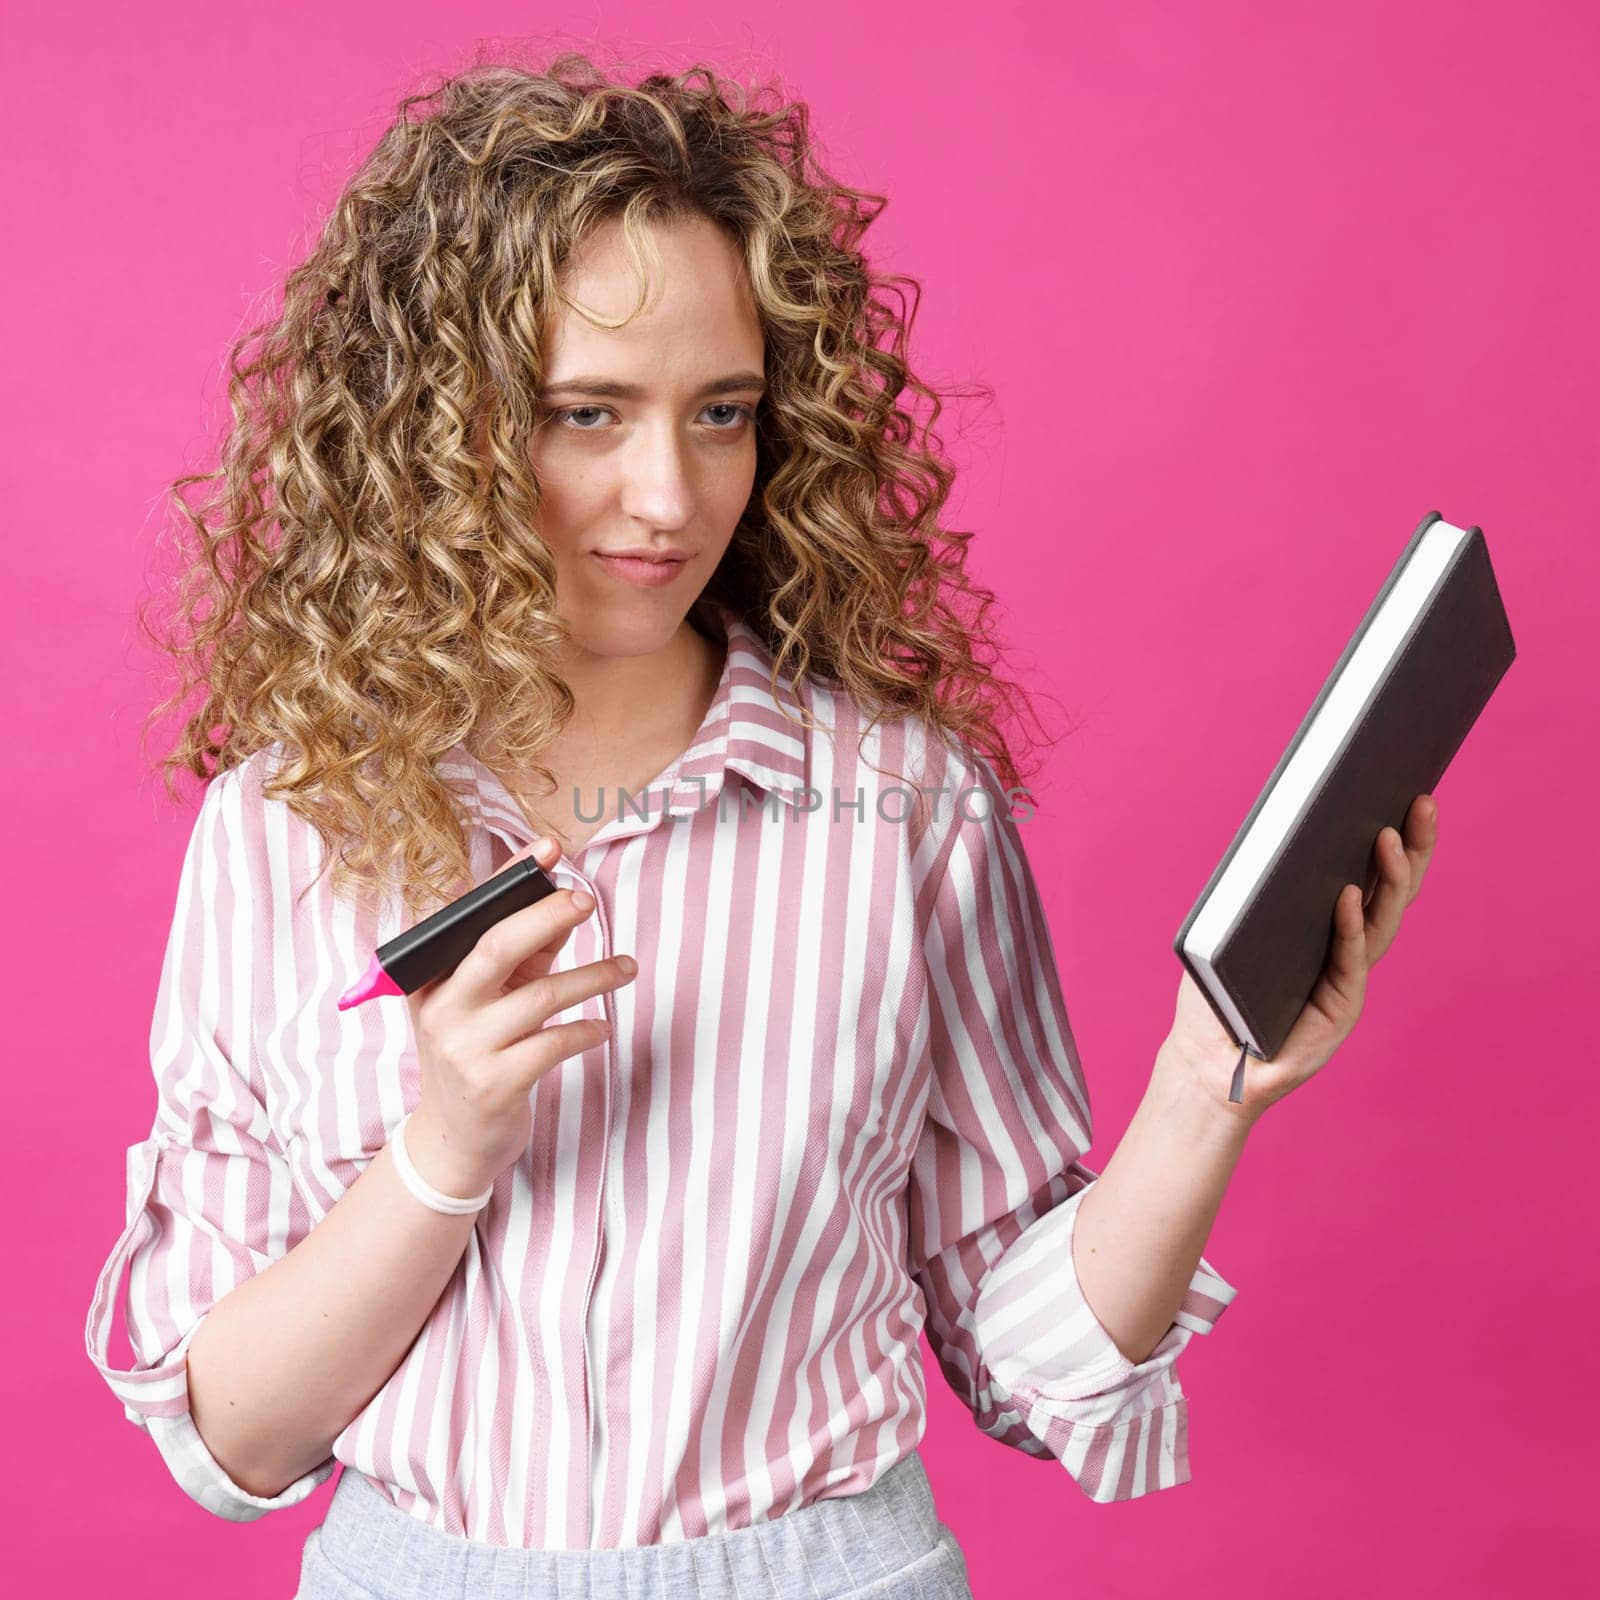 Fashionable woman in a striped shirt holding a diary and a marker. Isolated on pink background